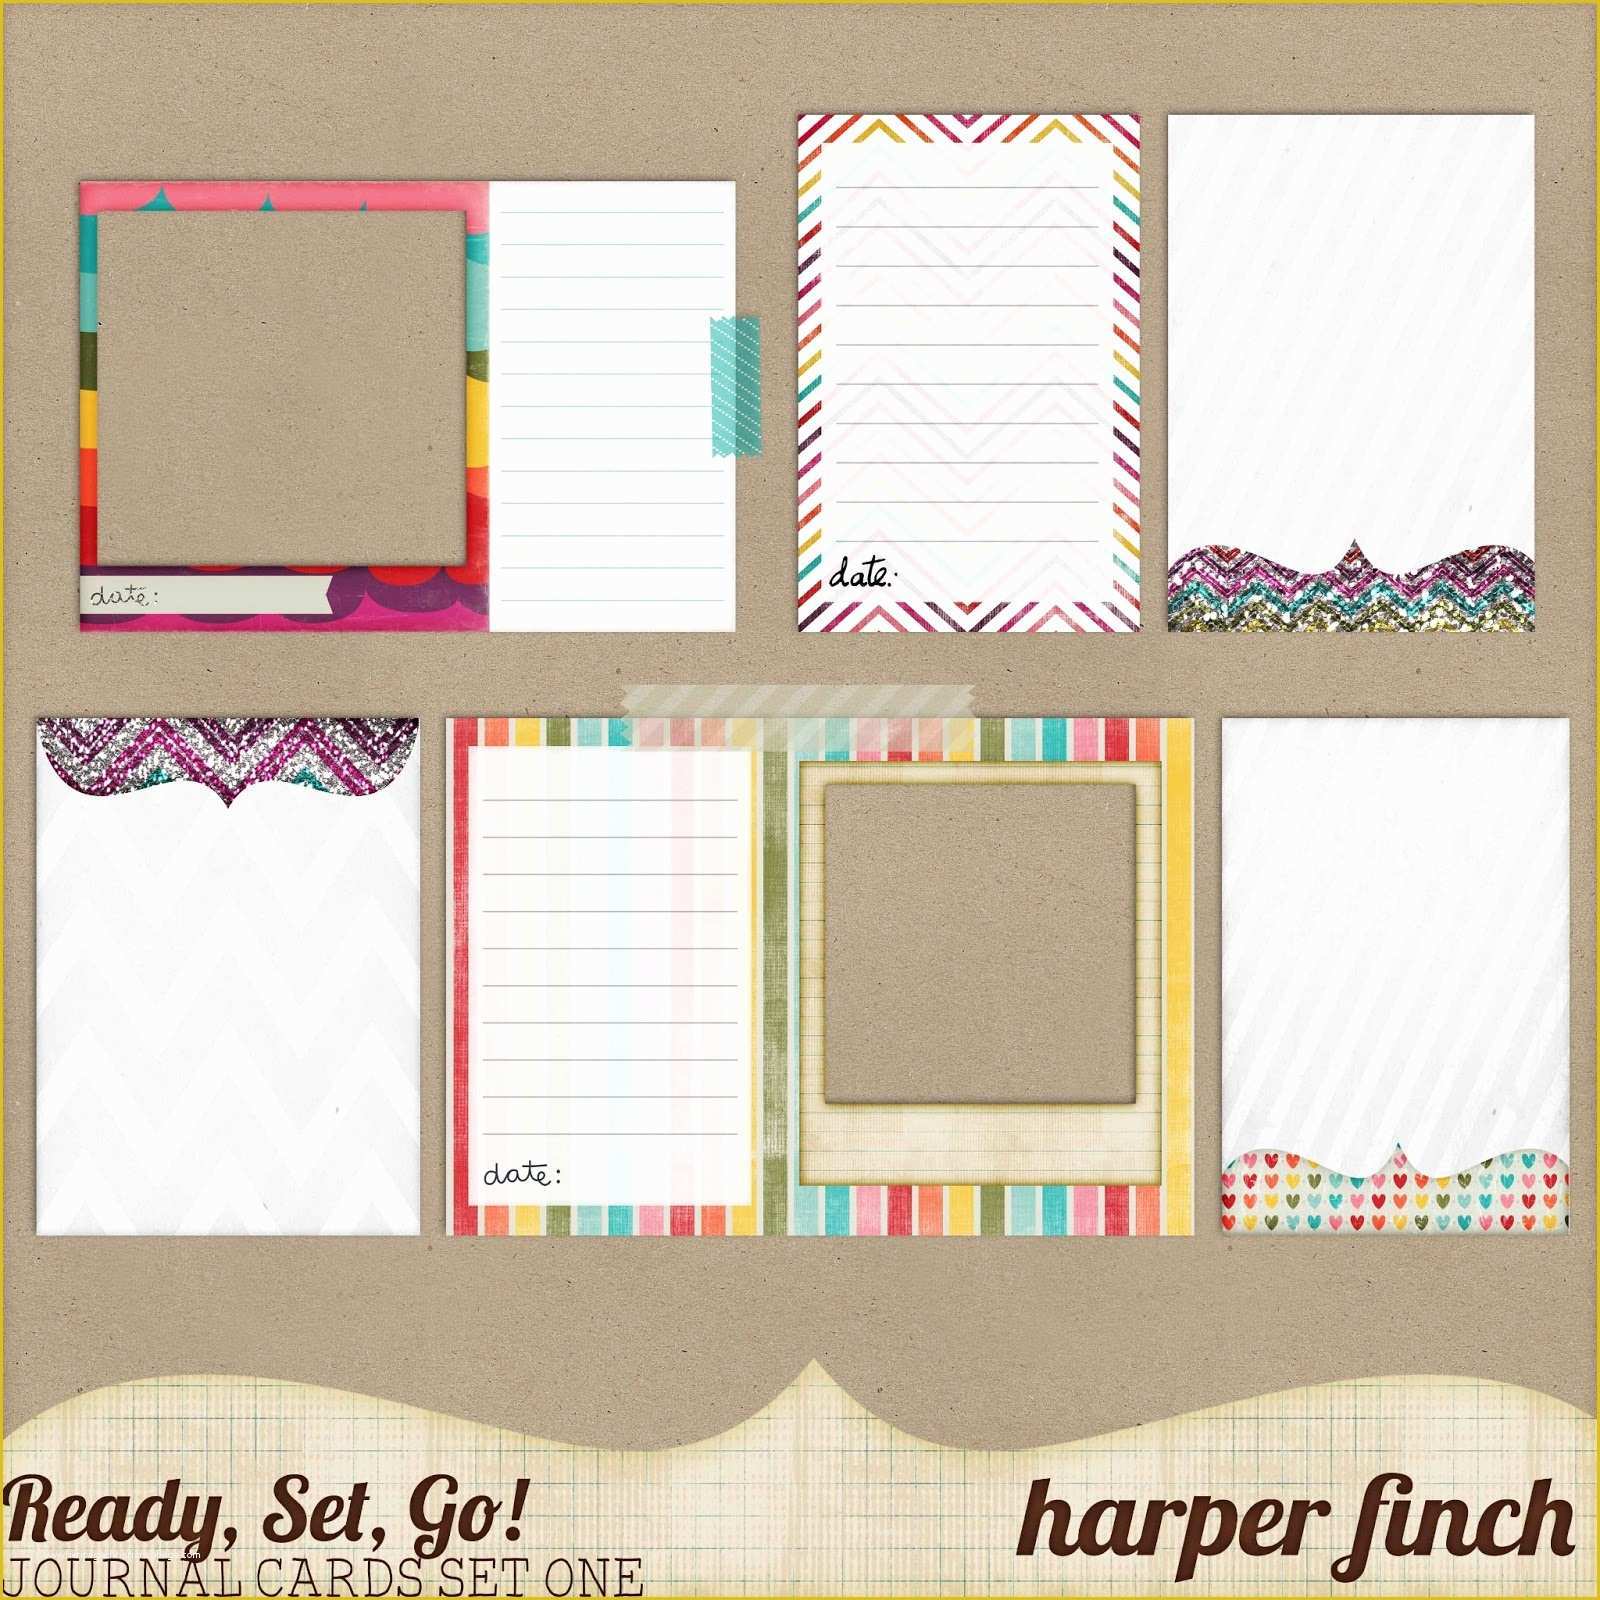 Free Project Life Templates Of Free Project Life Journaling Card Set & Frames – [ E